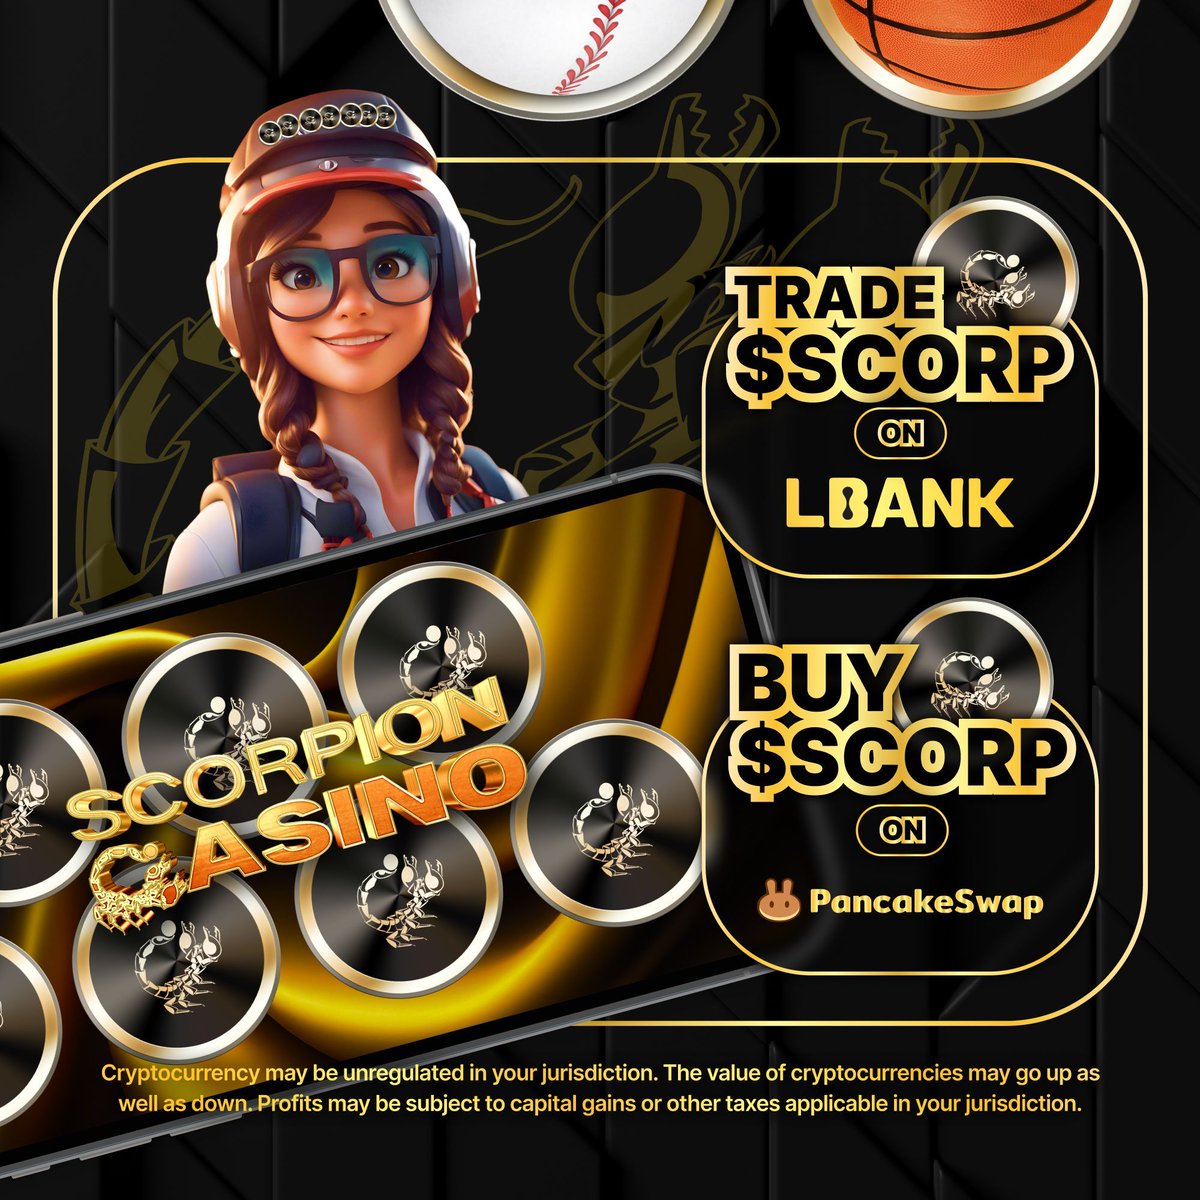 💰 Buy now on Pancakeswap HERE: 
buff.ly/3UlwSpf

💥 Trade $SCORP with Lbank now: buff.ly/3WmfuCv

It's an exciting time to be part of the $SCORP community! 🚀 Let's keep pushing forward together! 💼💼

Taxes: 0% Buy / 0% Sell 🚀

#CEXListing #ScorpionLaunch⭐️